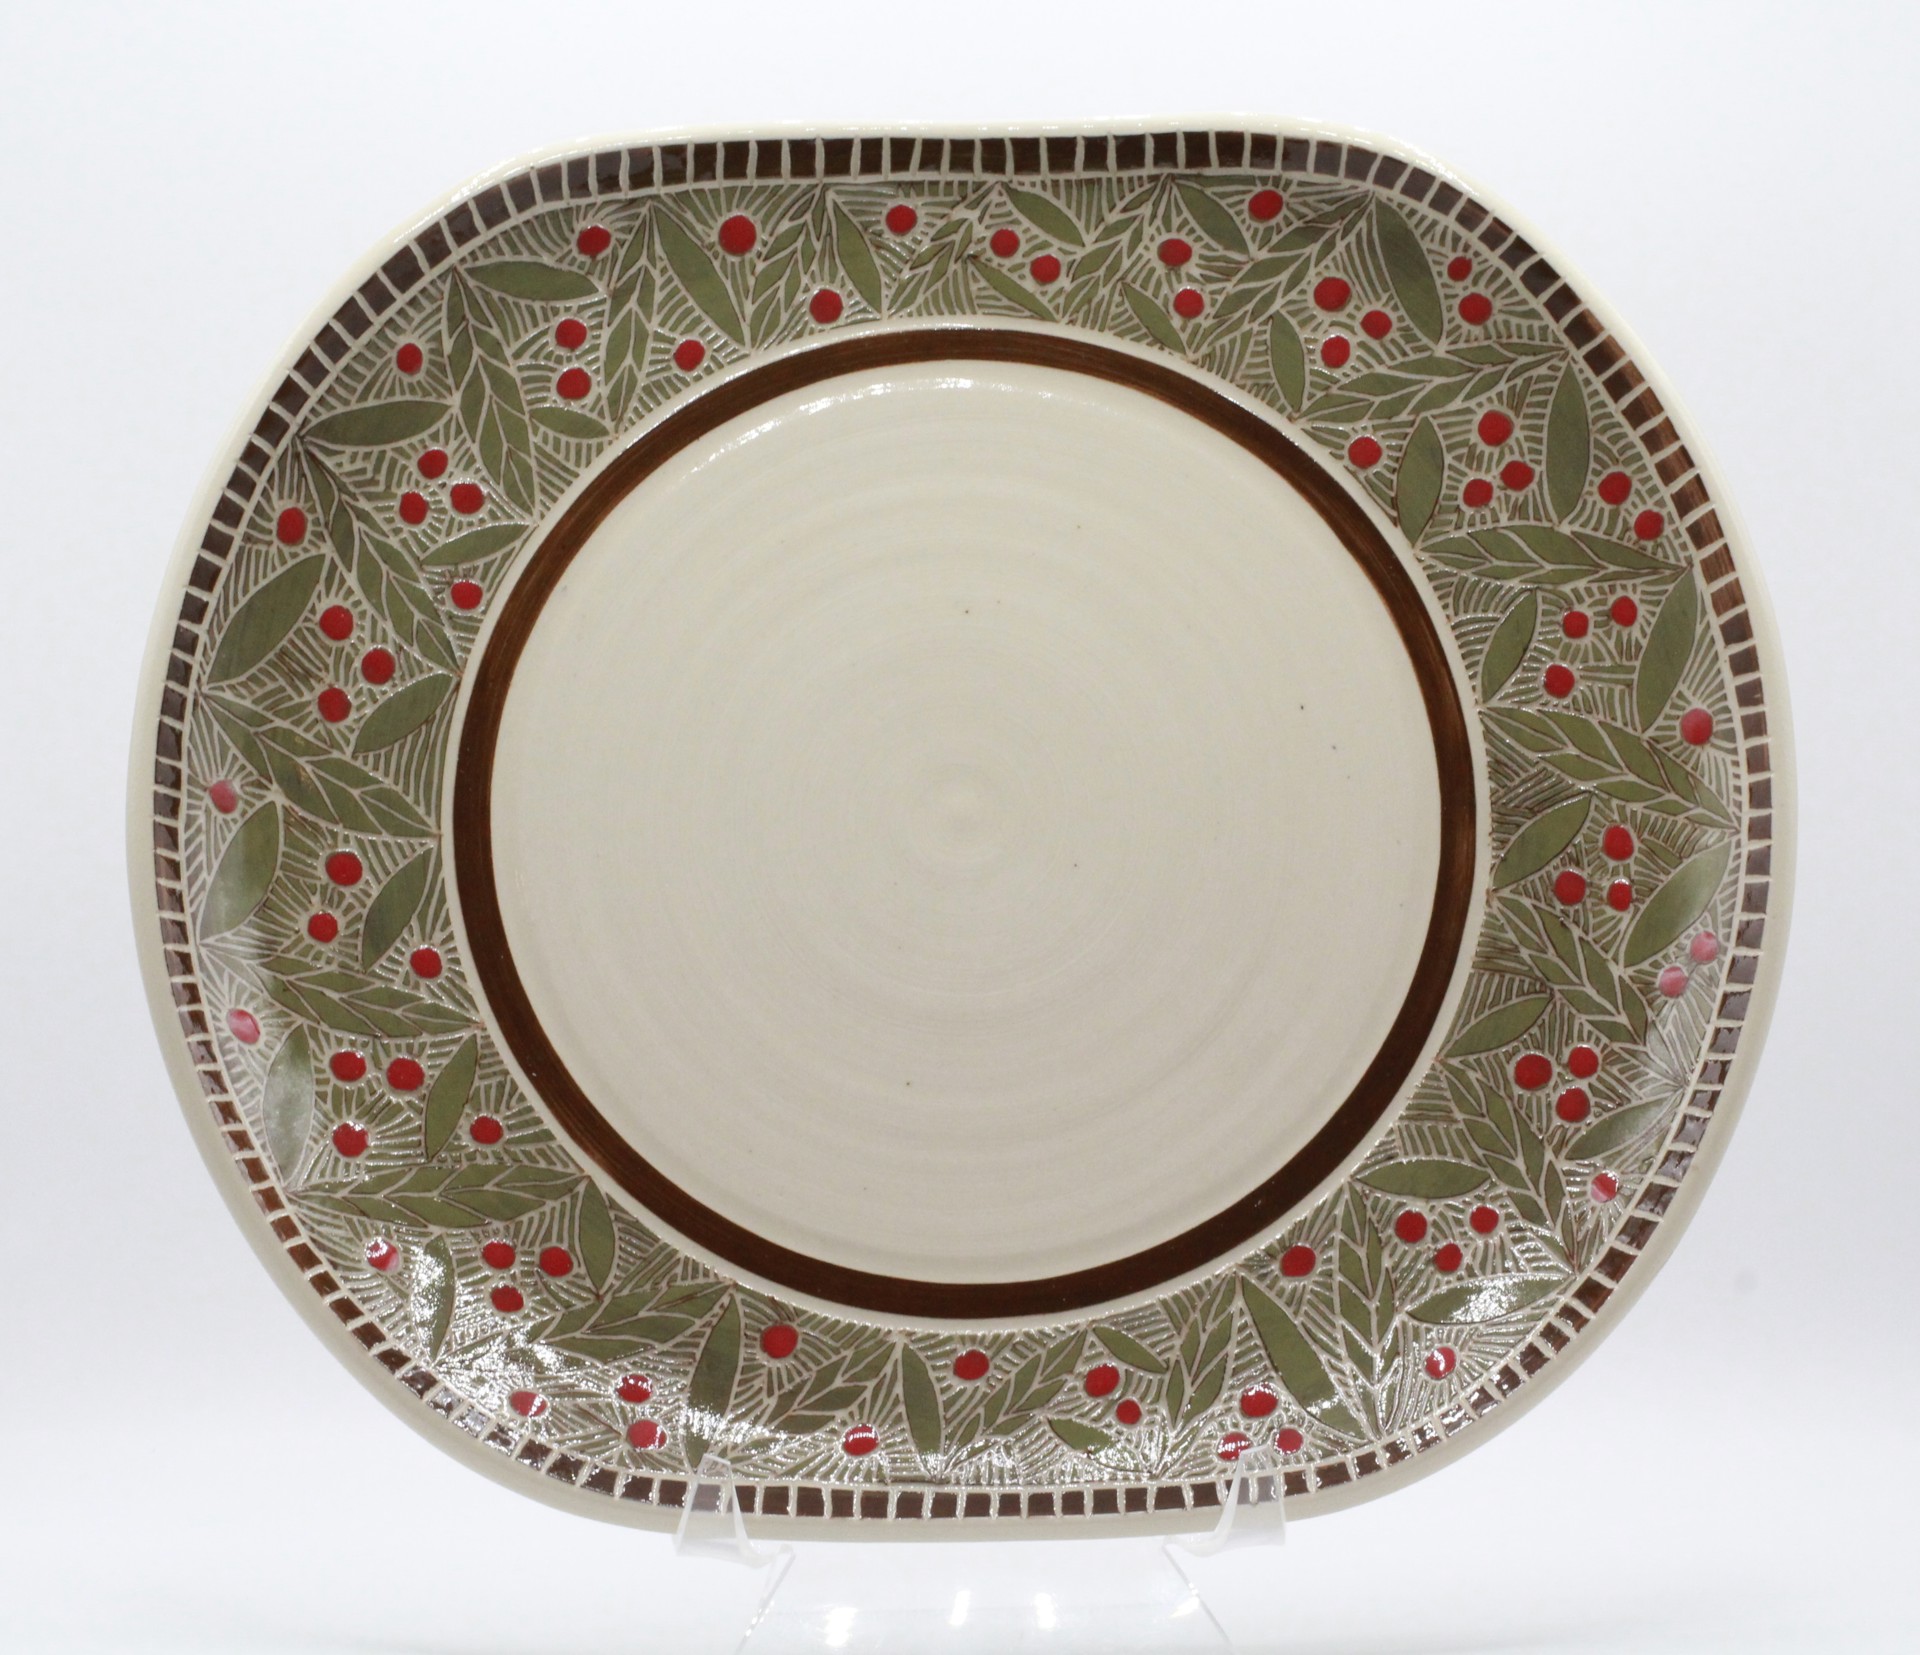 Leaves and Berries Large Oval Platter by Kelly Price